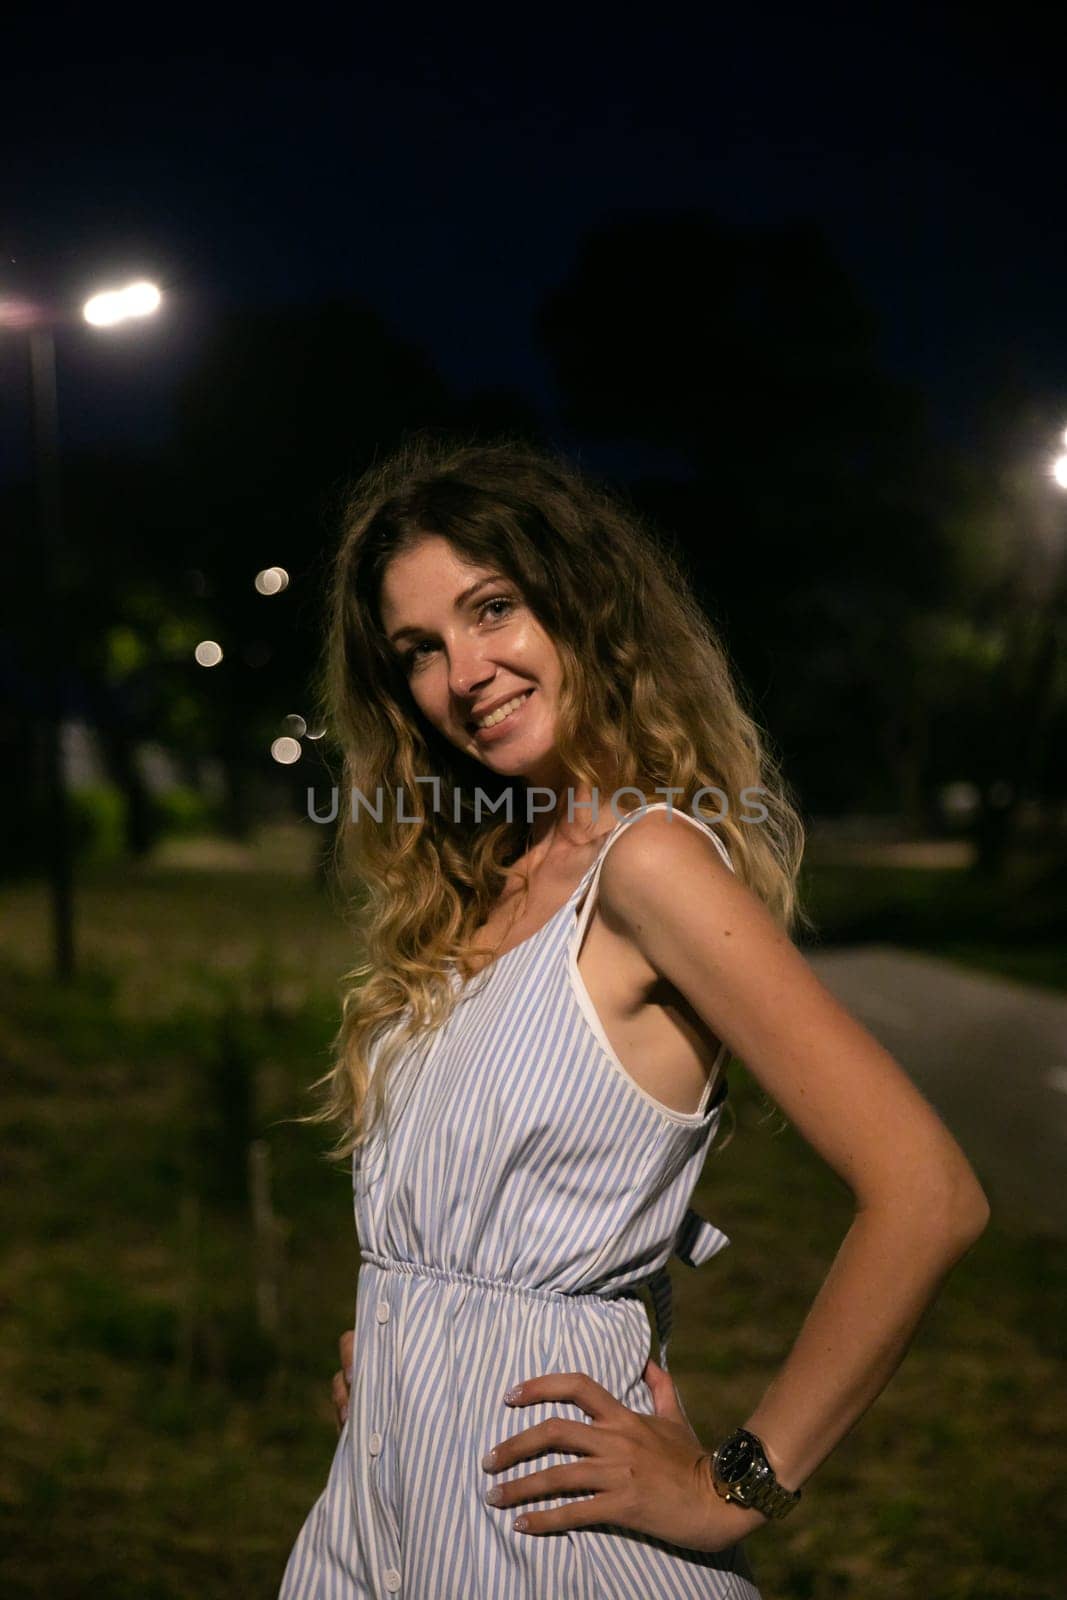 Portrait of smiling woman in summer dress at night